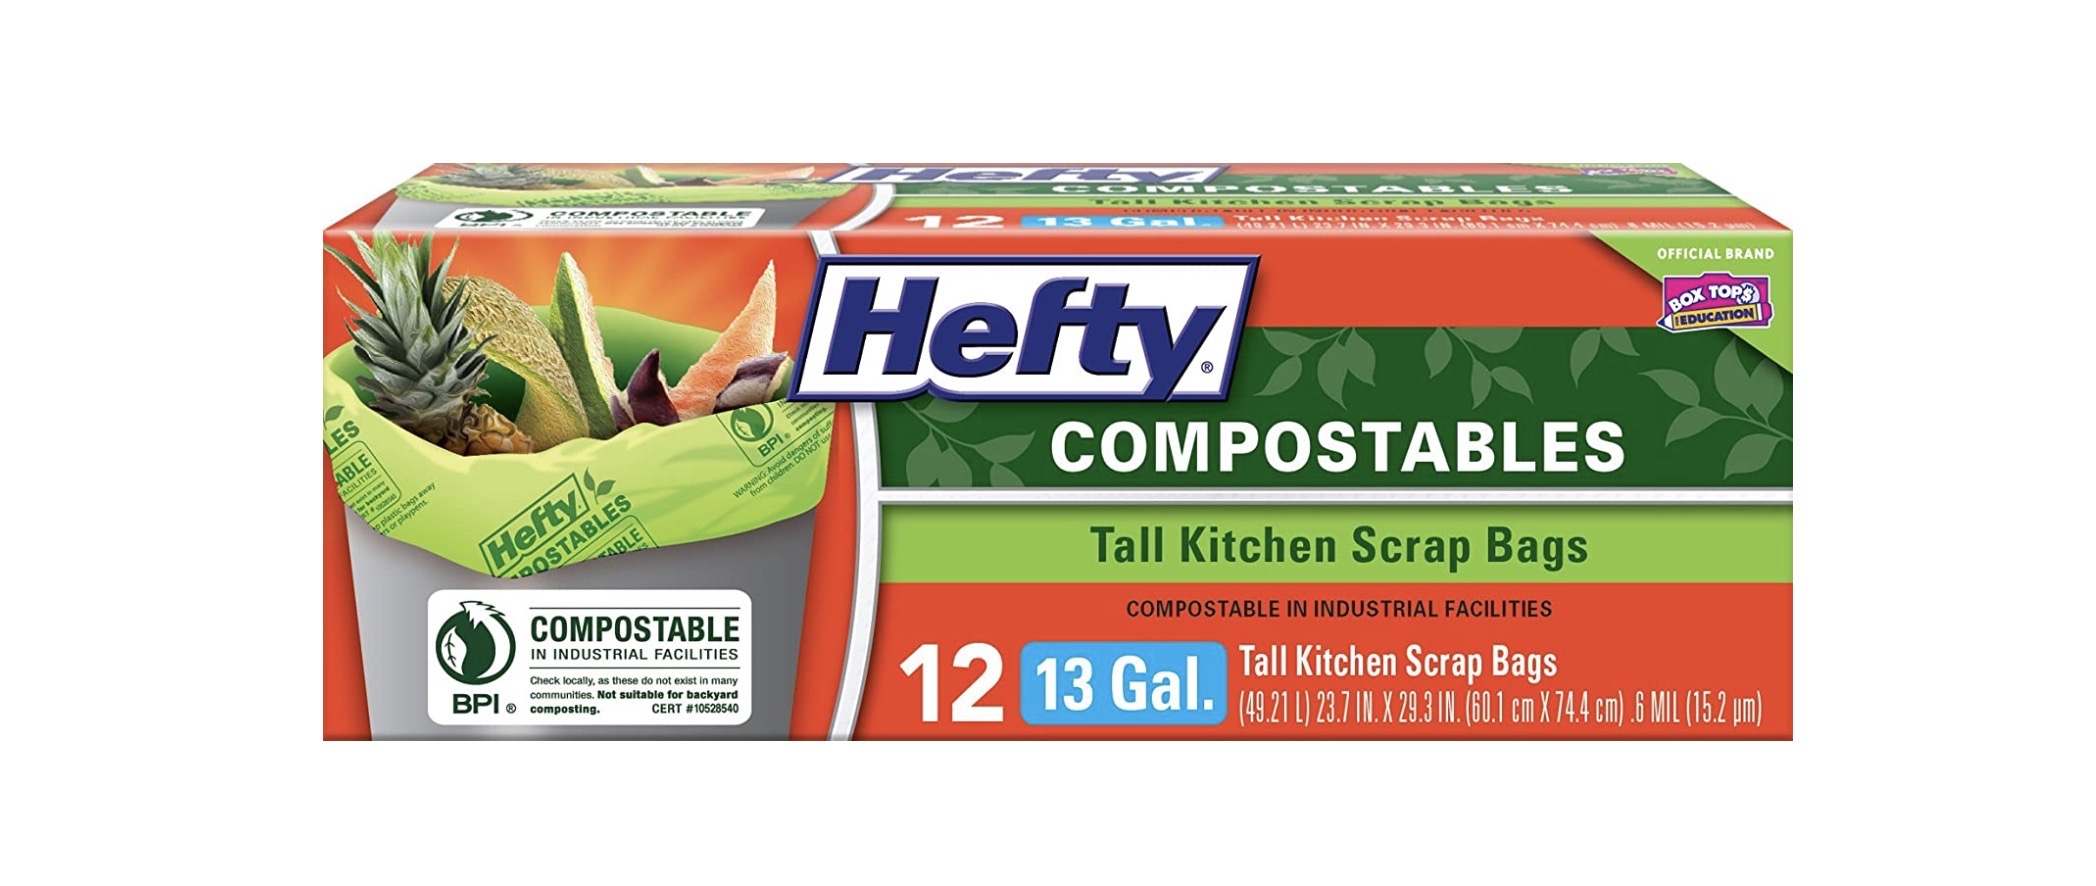 Hefty Tall Kitchen Composting Bags, 13 Gallon, 12 Count 